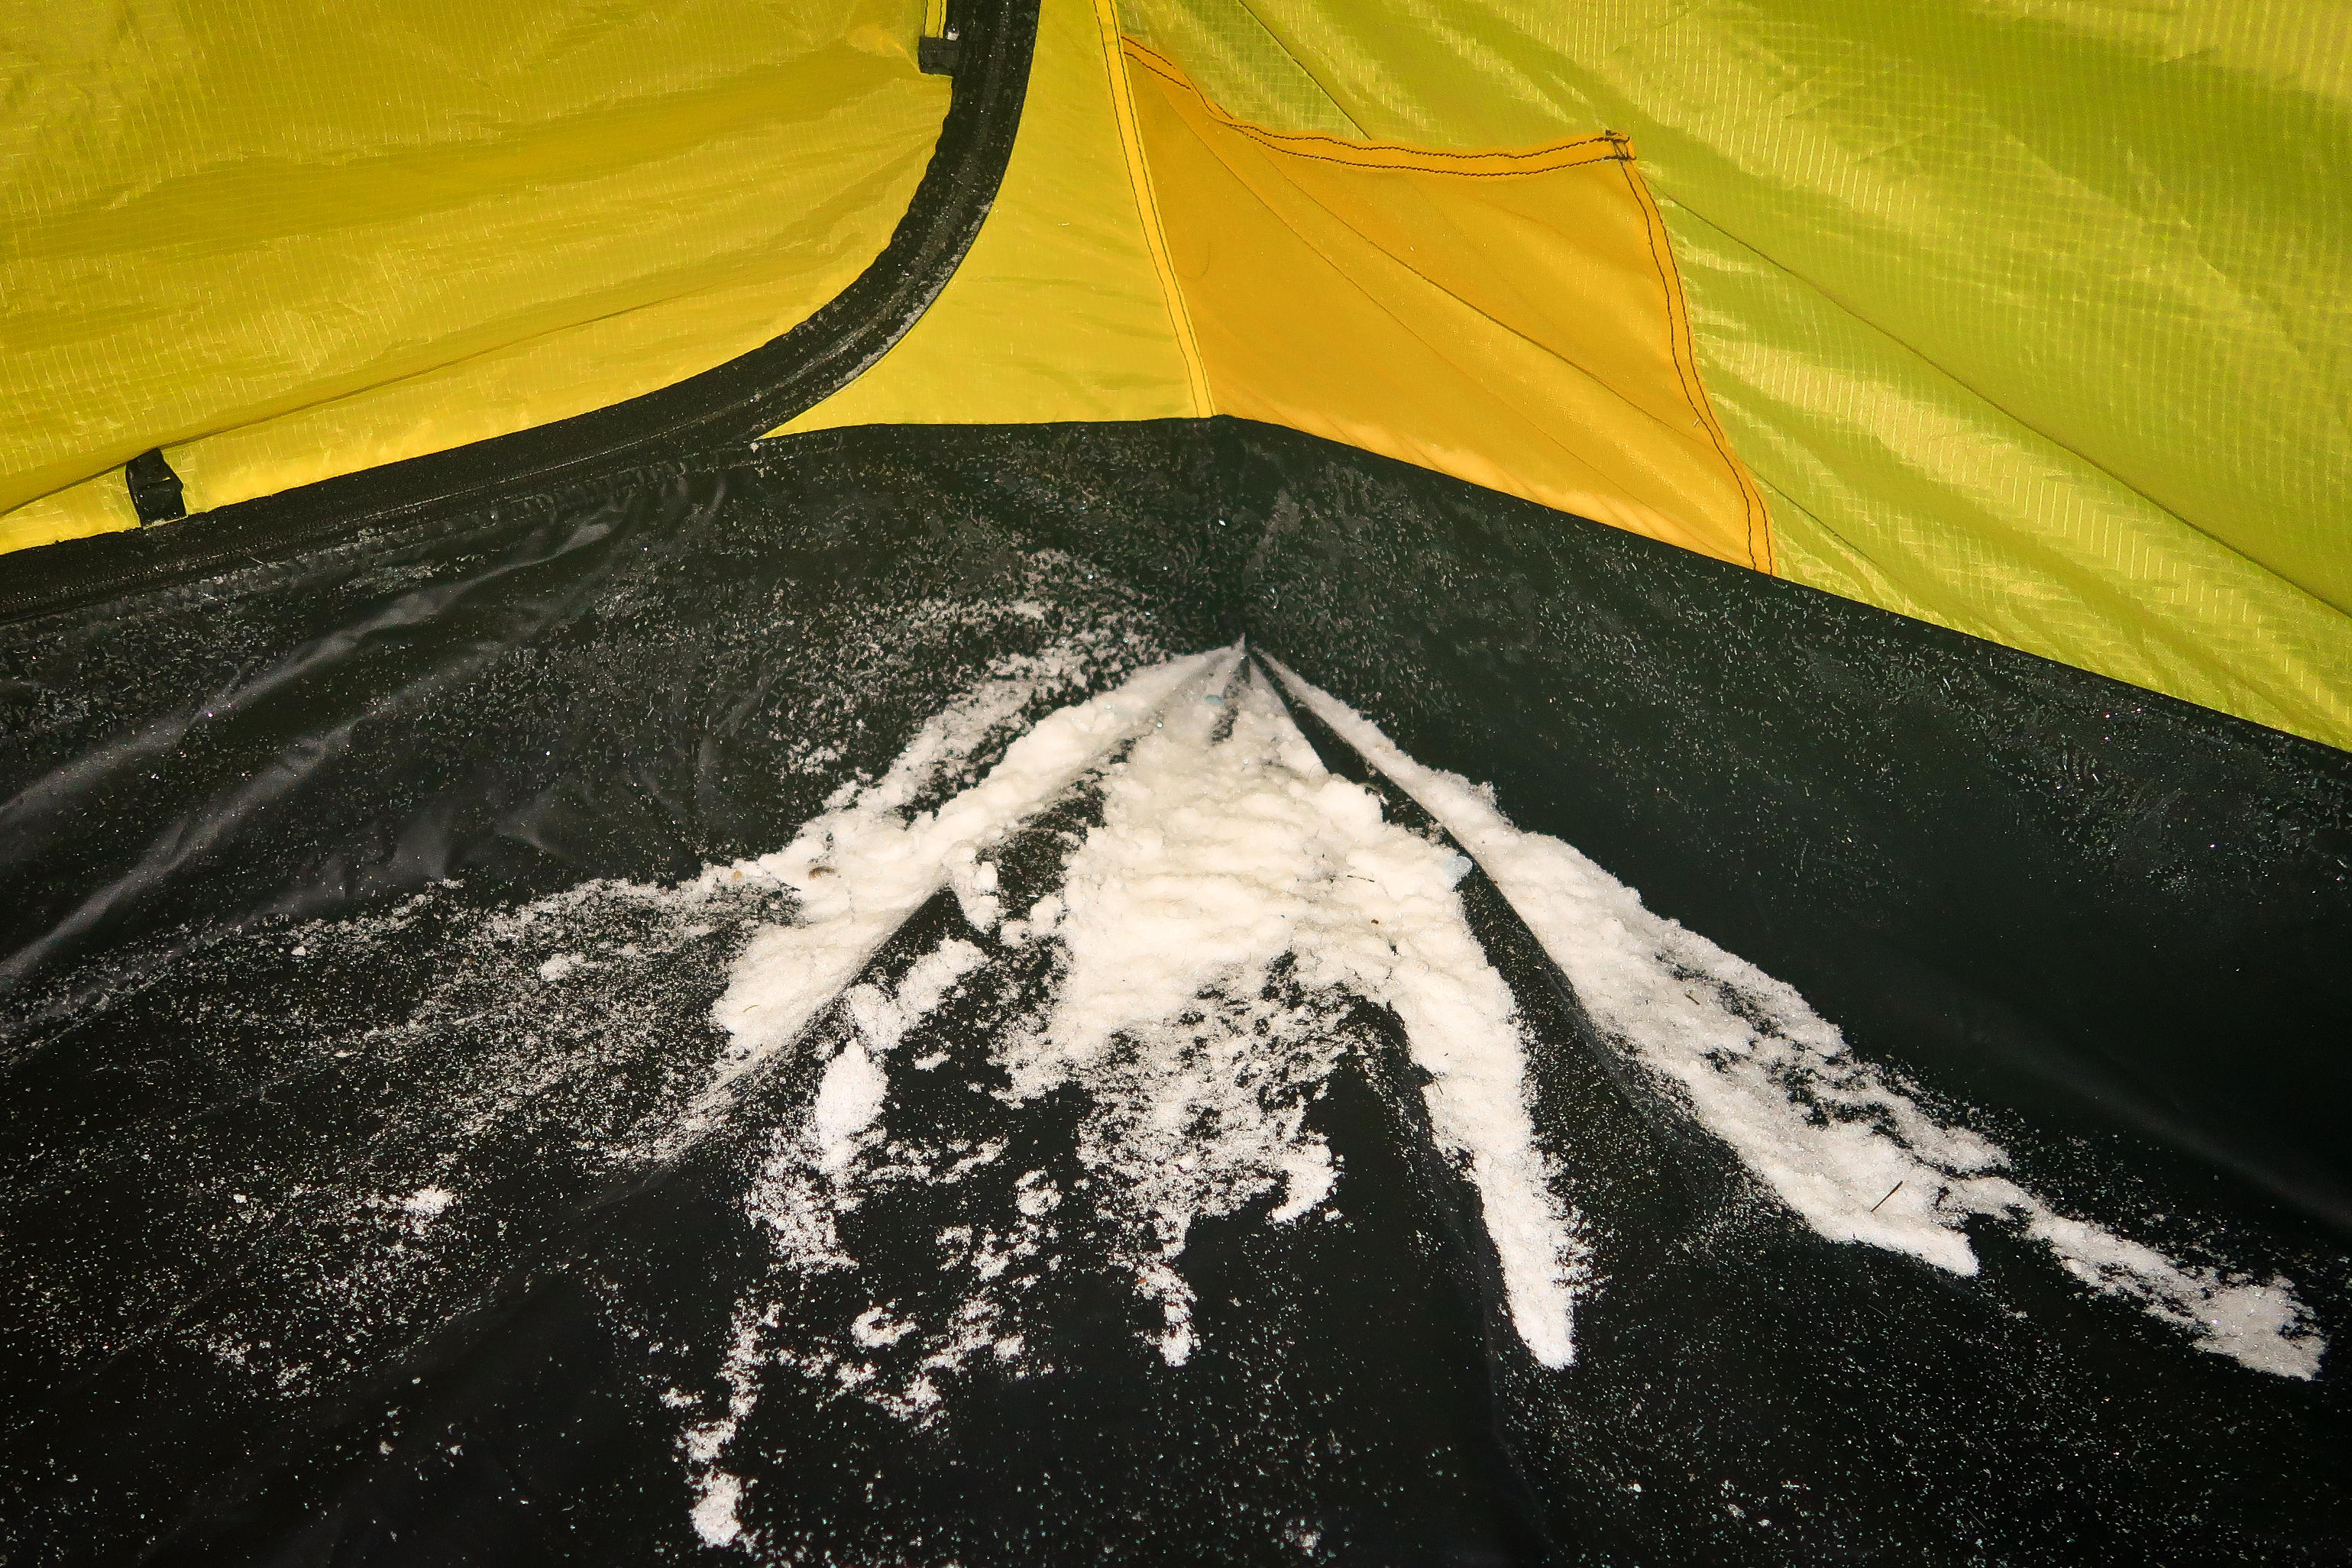 Snow forming inside the tent from condensation